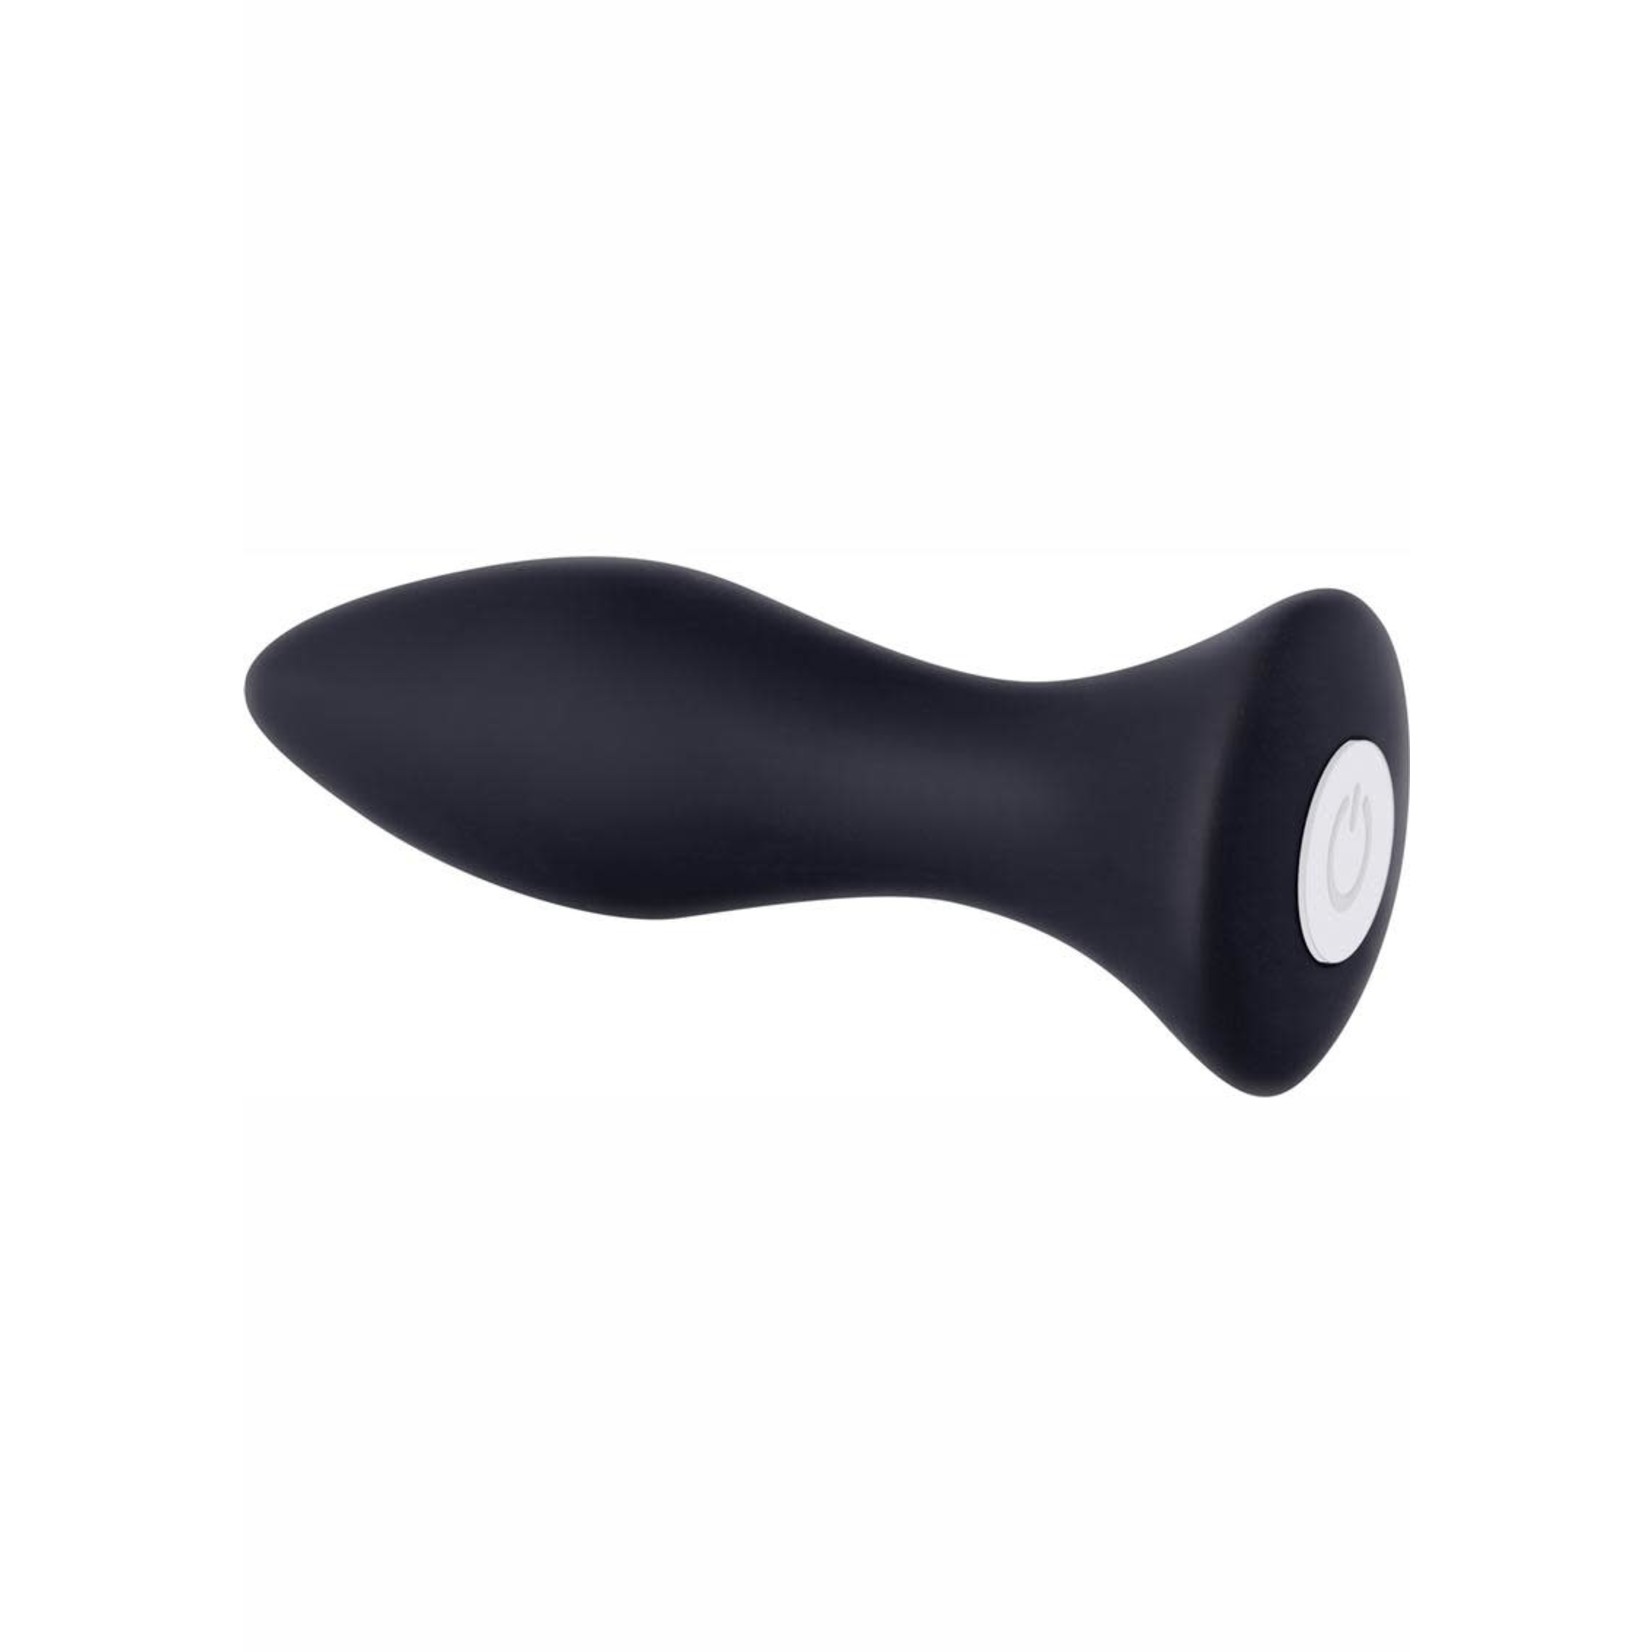 Mighty Mini Rechargeable Silicone Anal Plug With 20 Functions And Speeds - Black